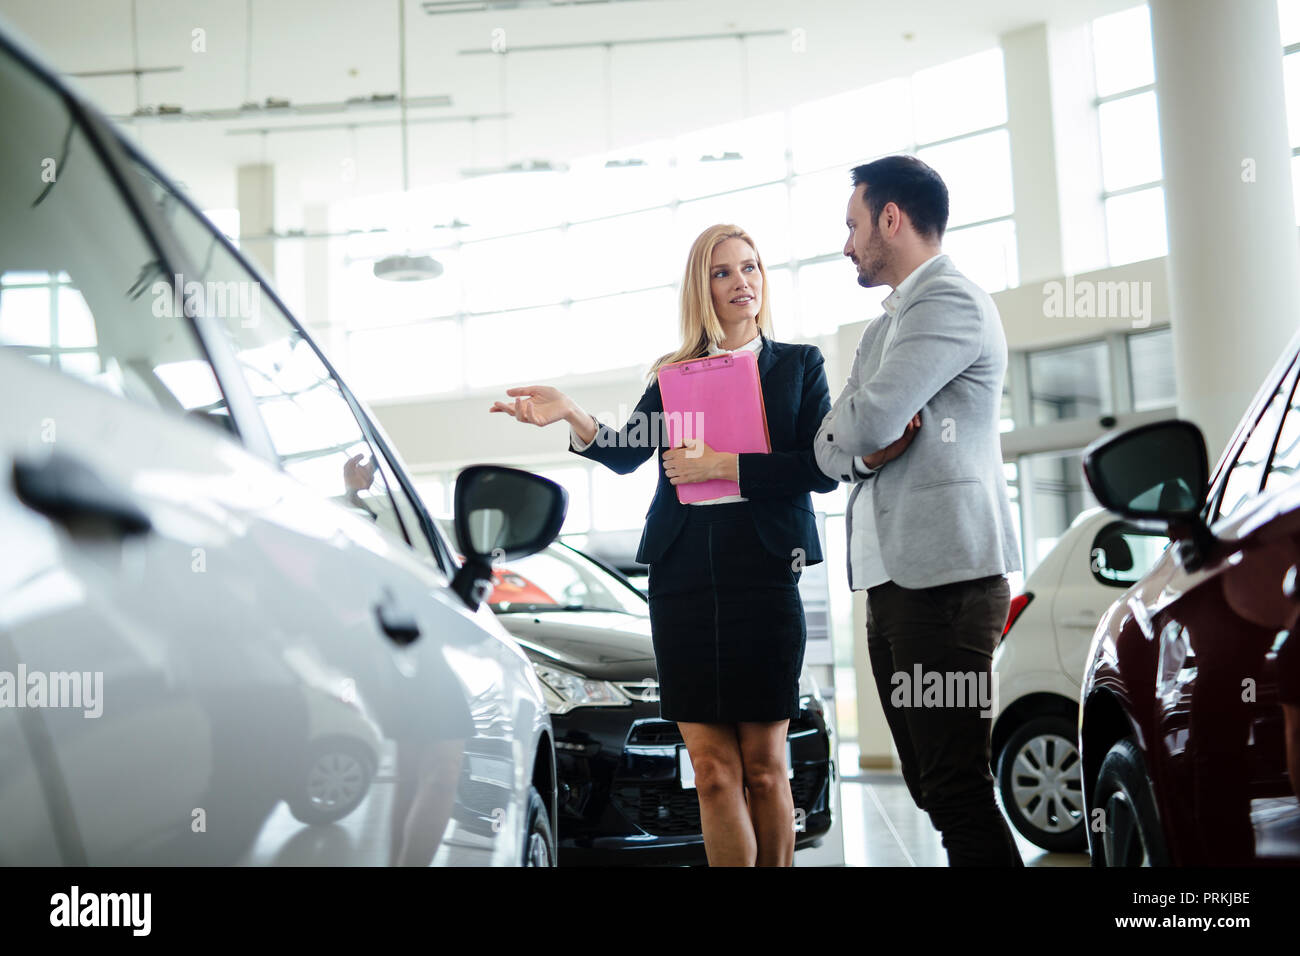 Professional salesperson during work with customer at car dealership. Stock Photo